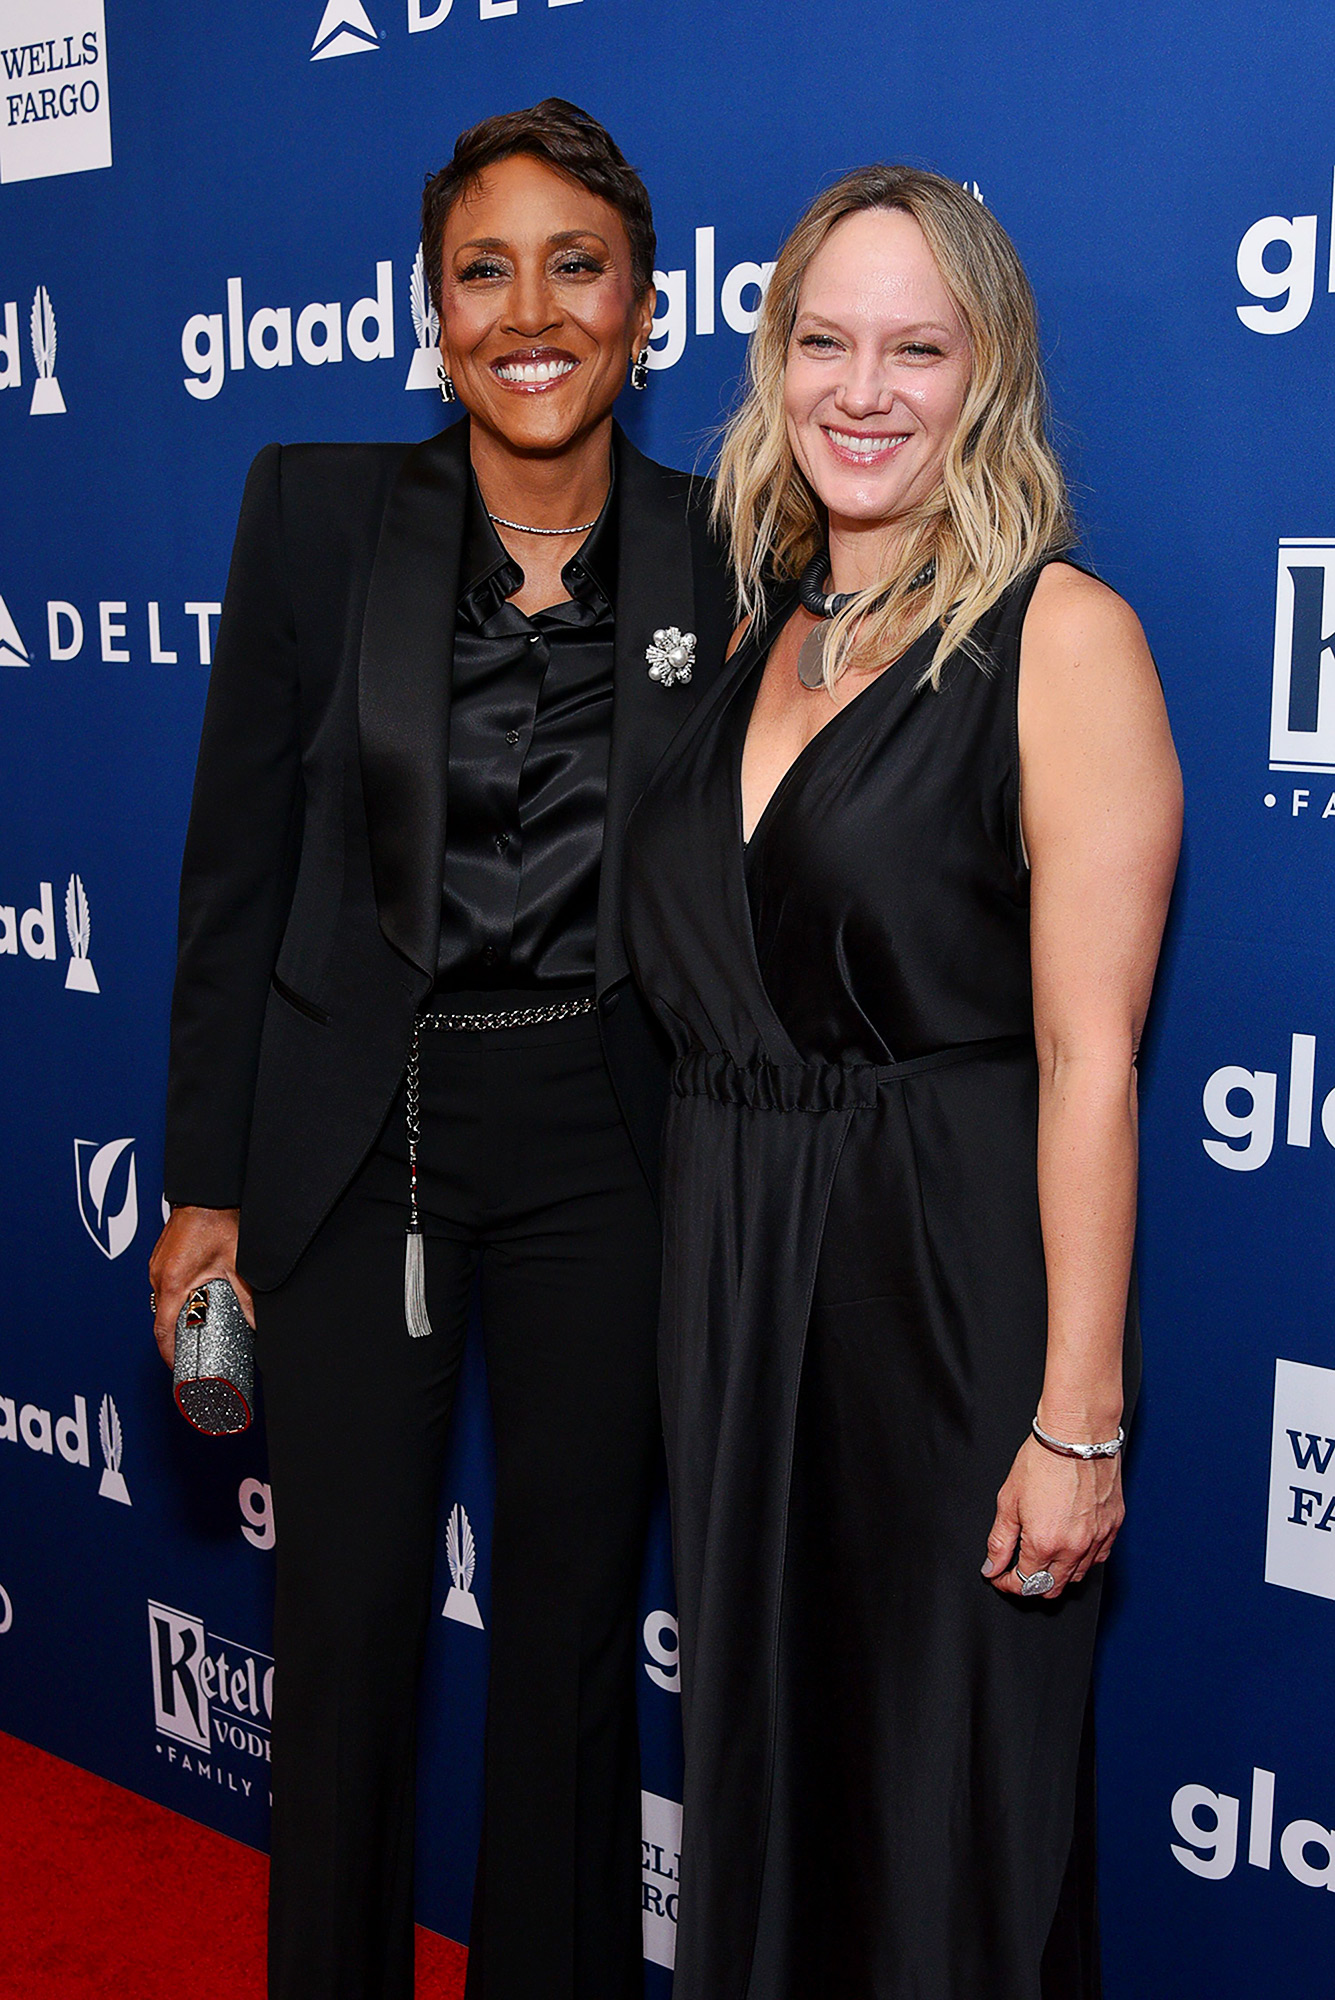 Robin Roberts, Amber Laign Relationship Timeline - 660 29th Annual GLAAD Media Awards, Arrivals, New York, USA - 05 May 2018